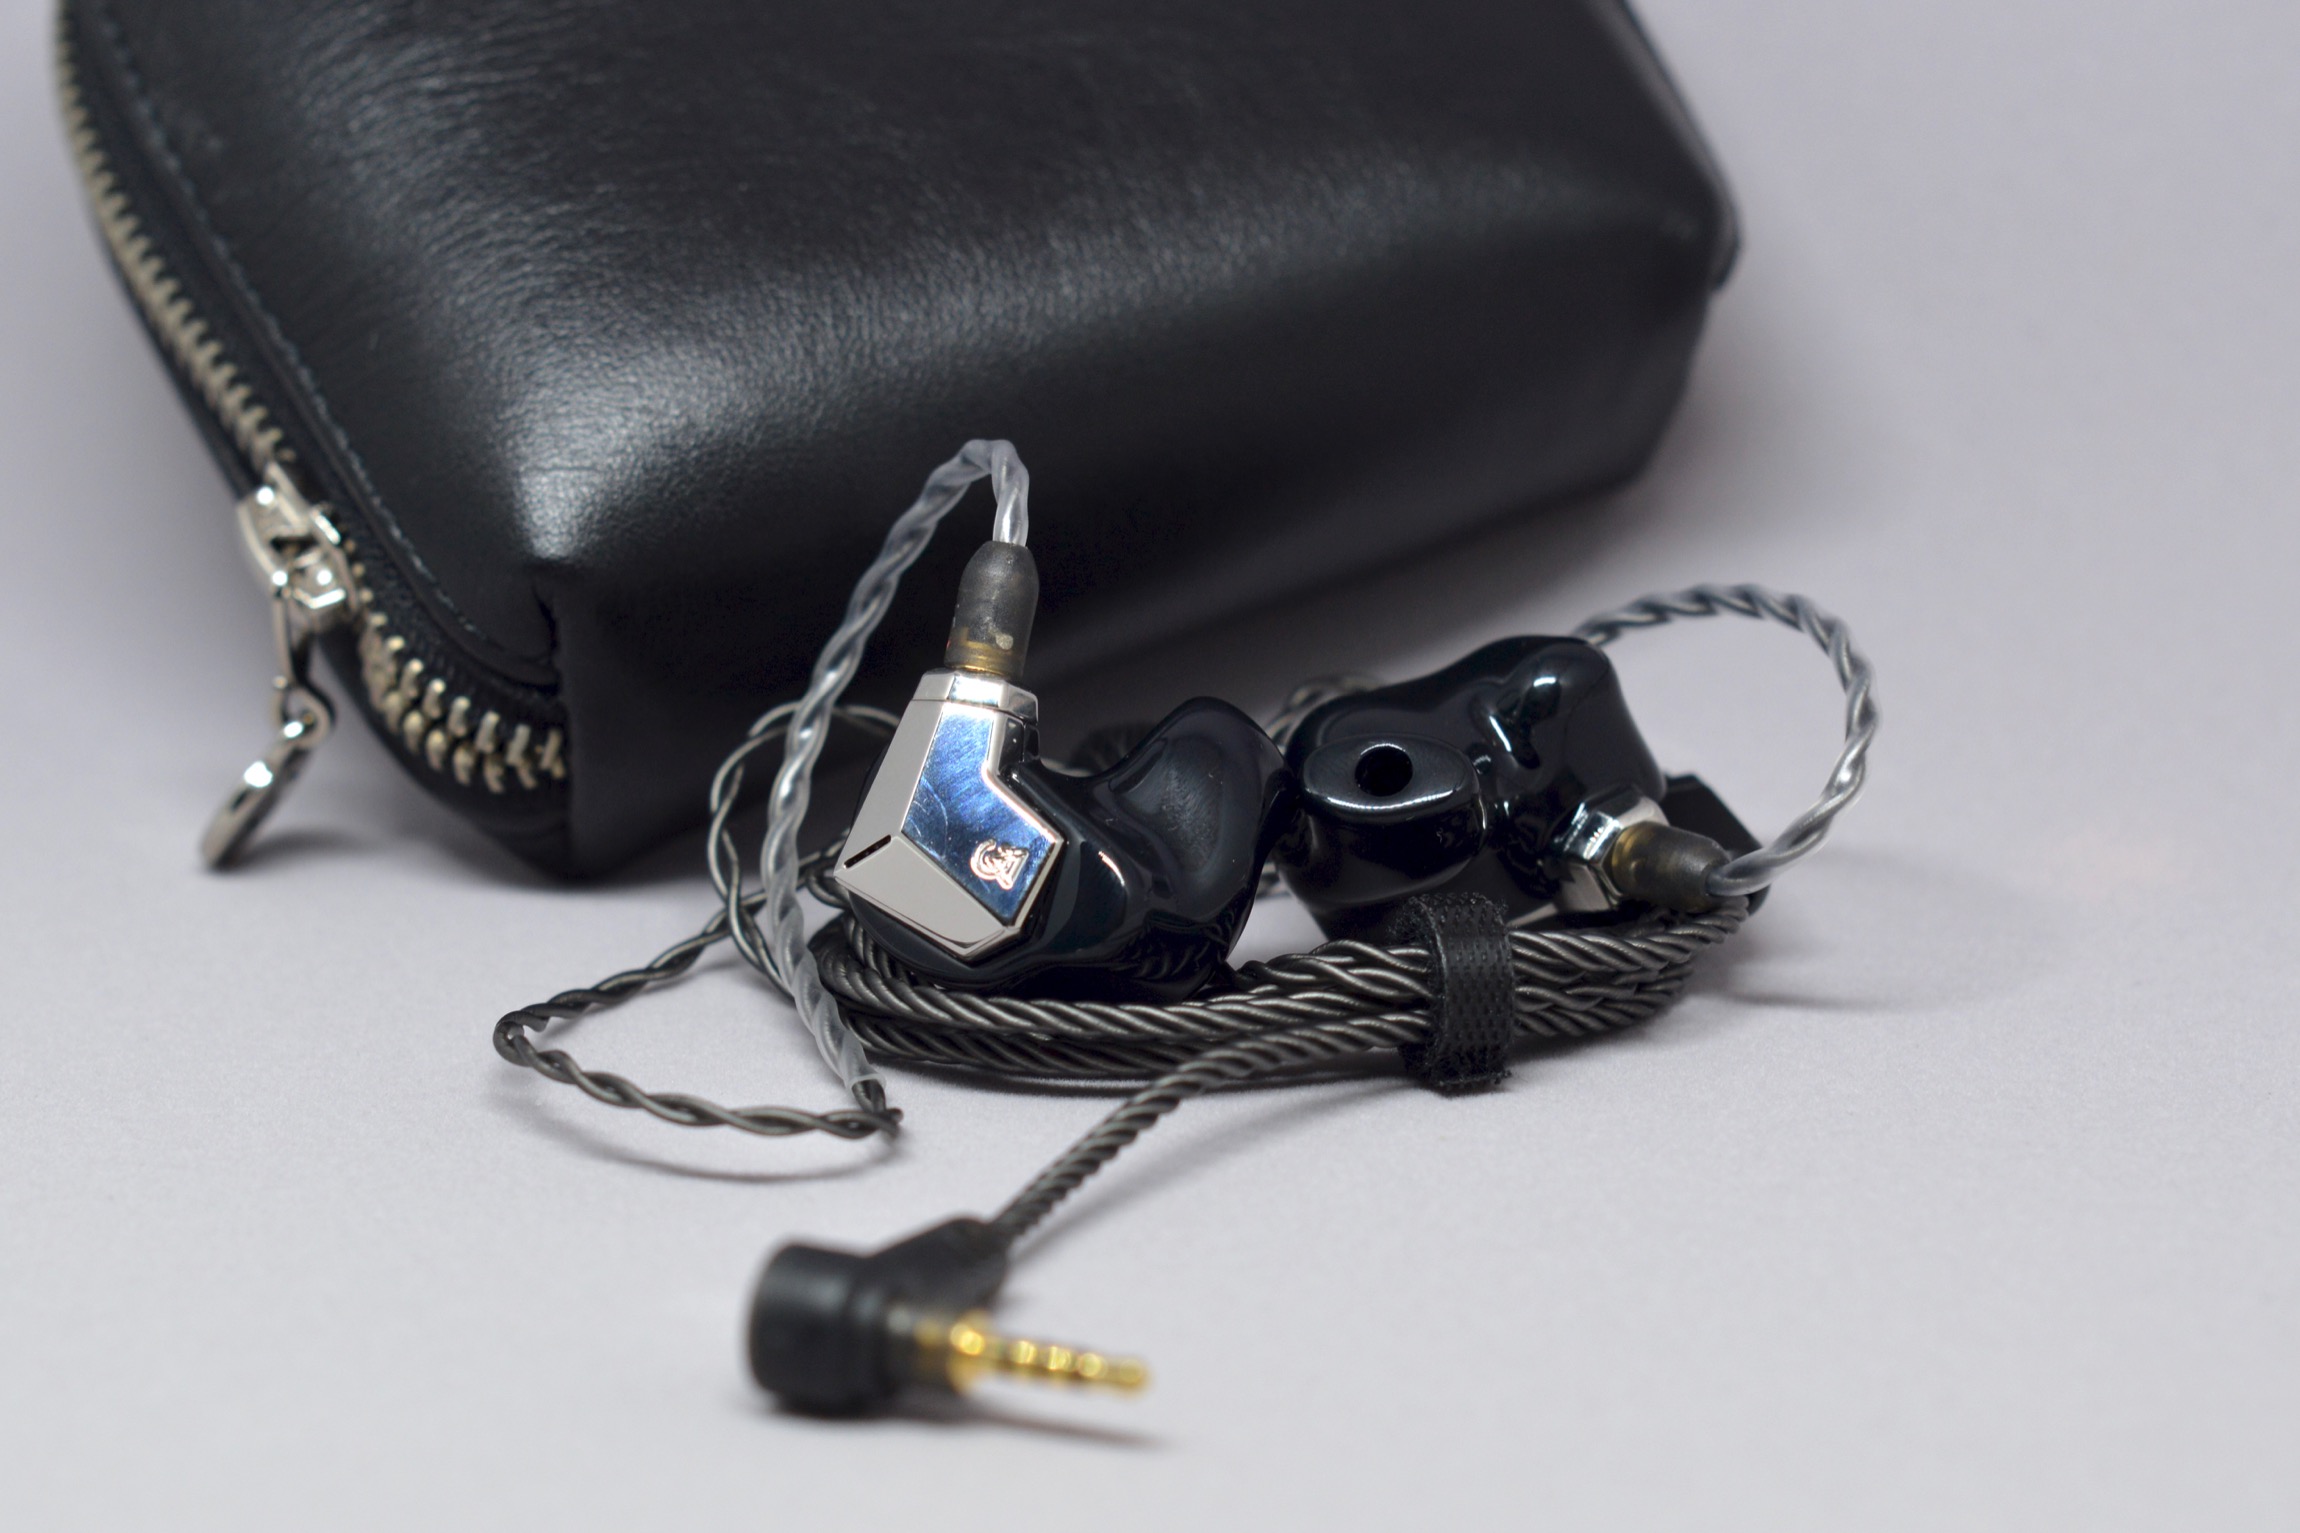 Wired in-ear monitors: From $80 to $1,500, we compare six models